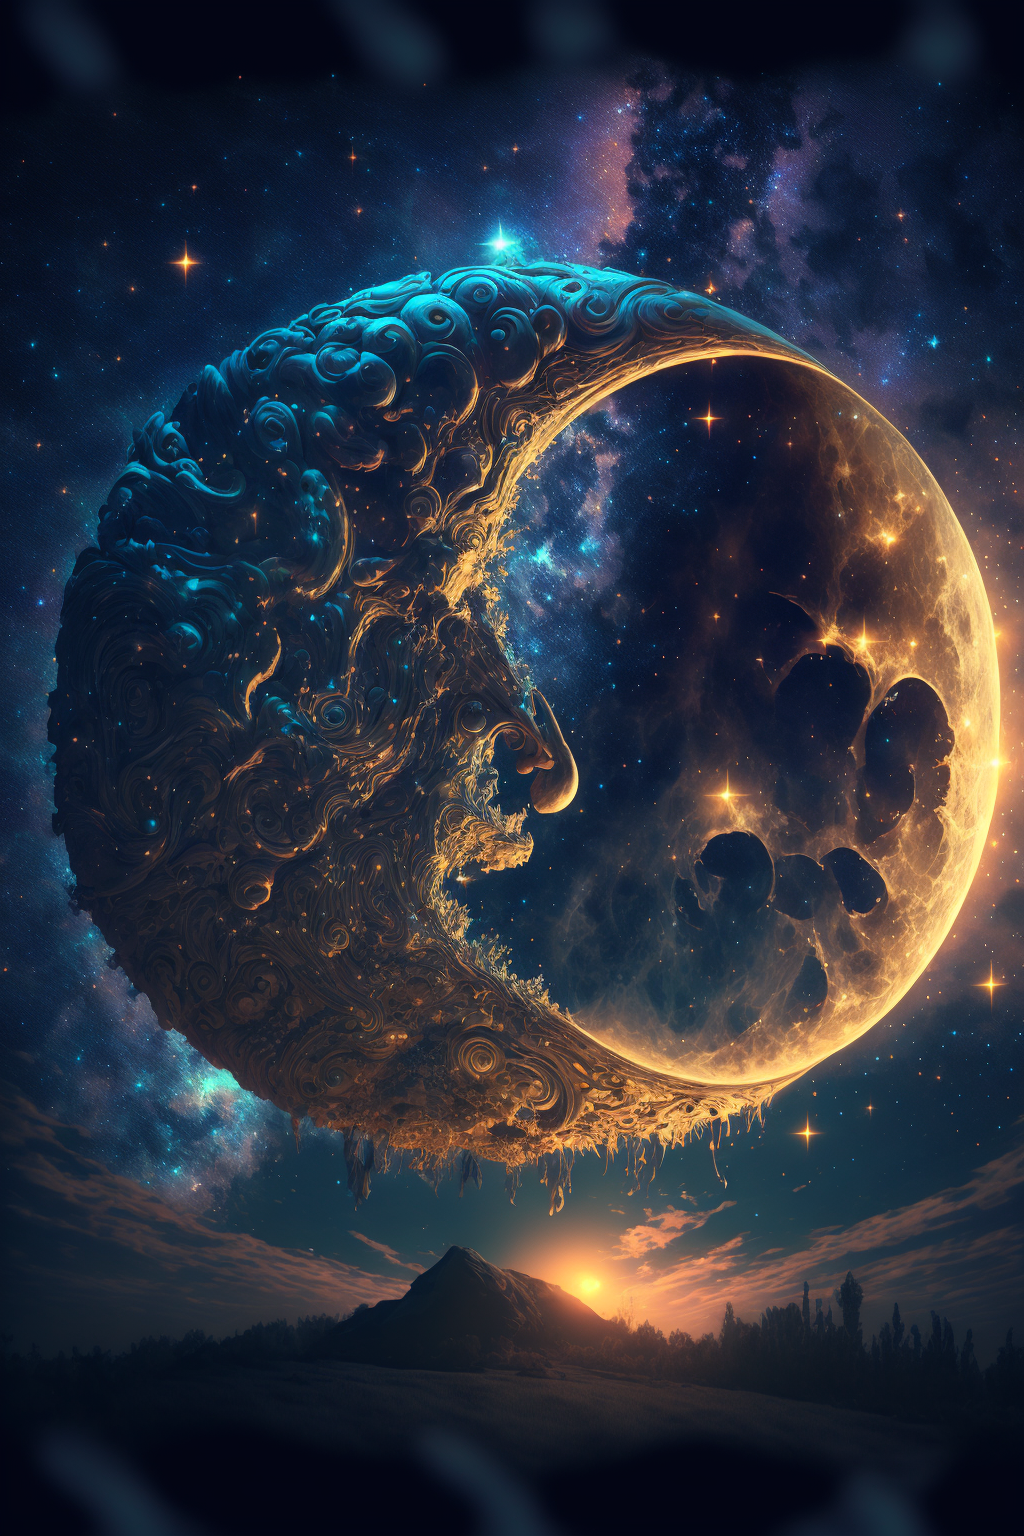 Moon in the style of Psytrance UHD 7